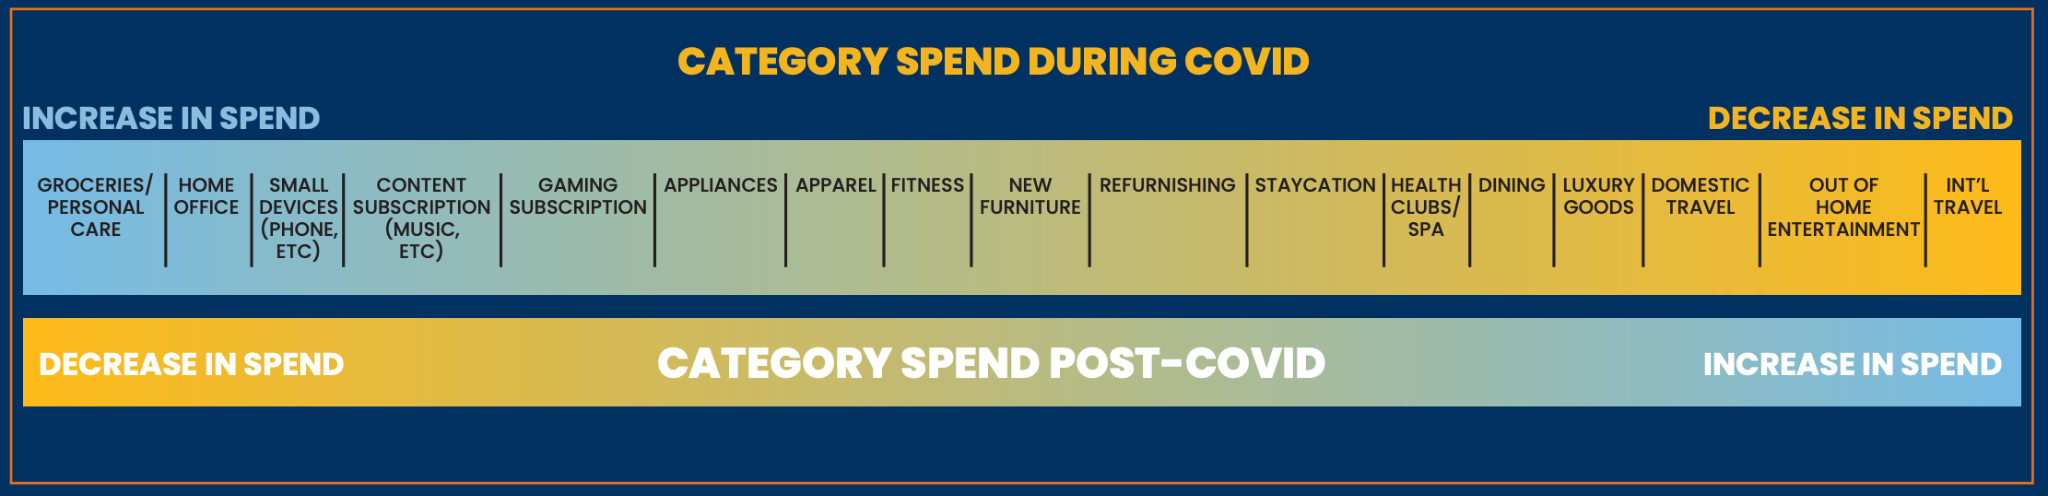 category spend during covid